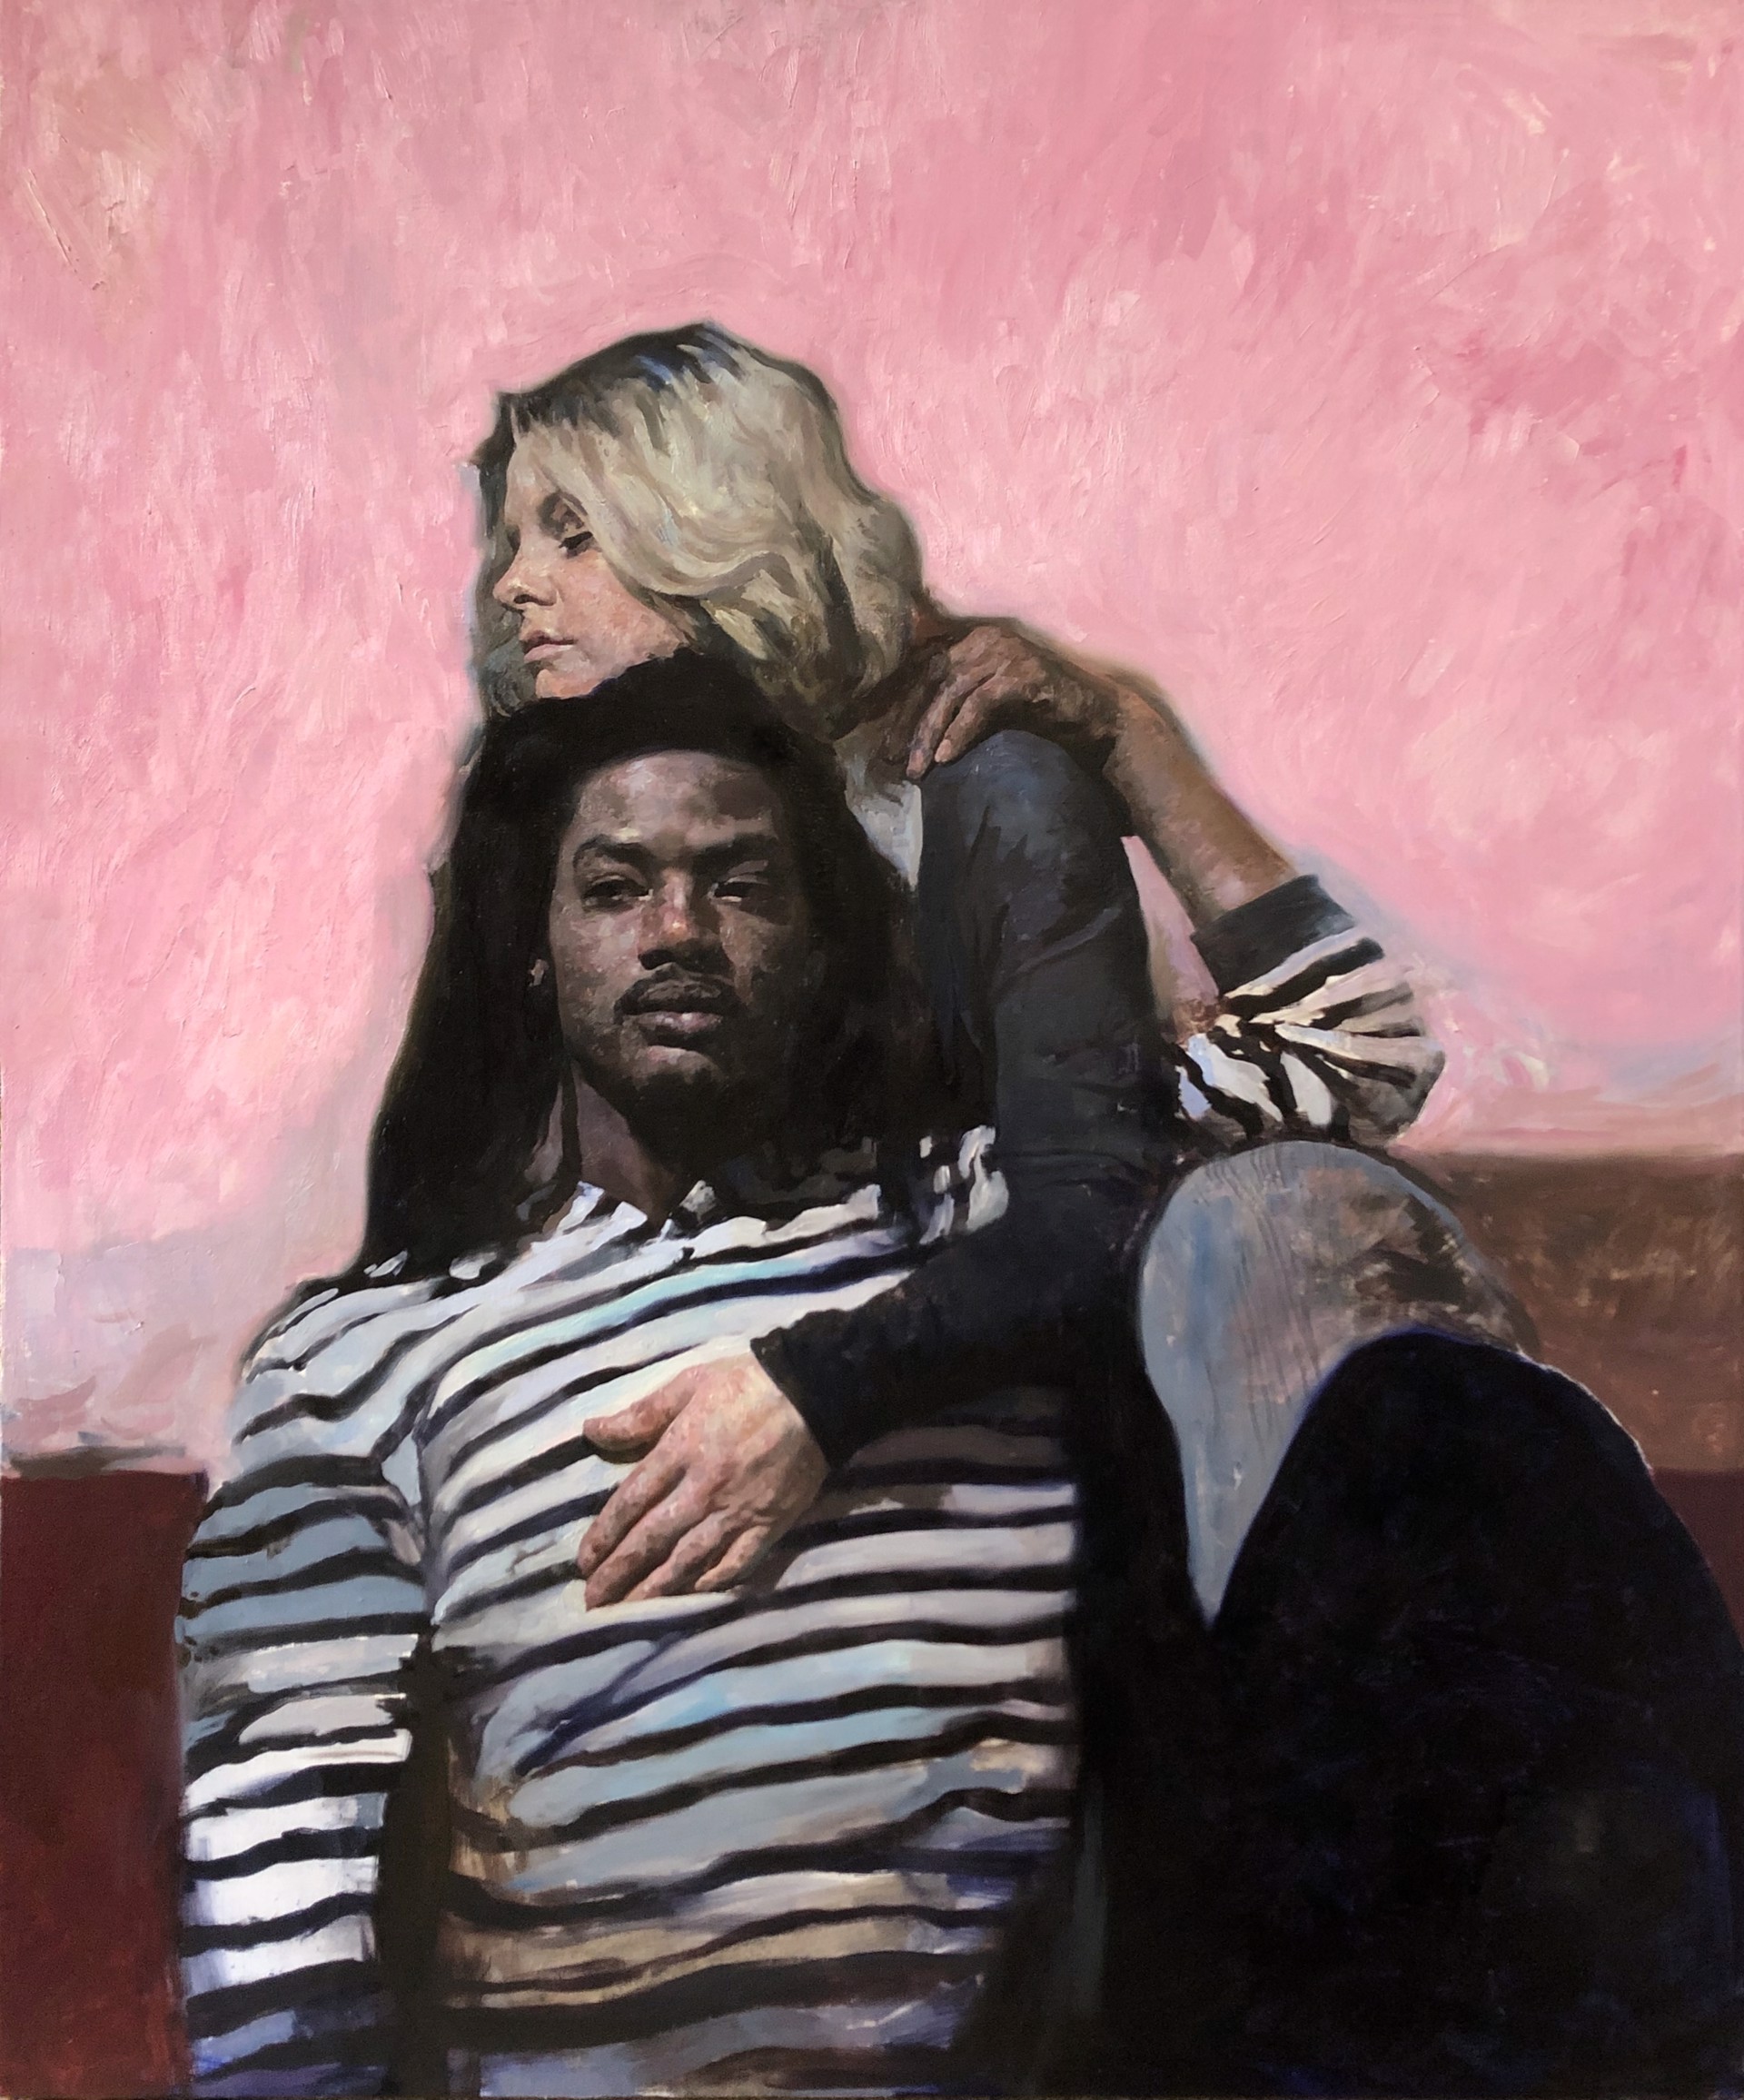 Susan and Quan in the Pink Room by Hollis Dunlap